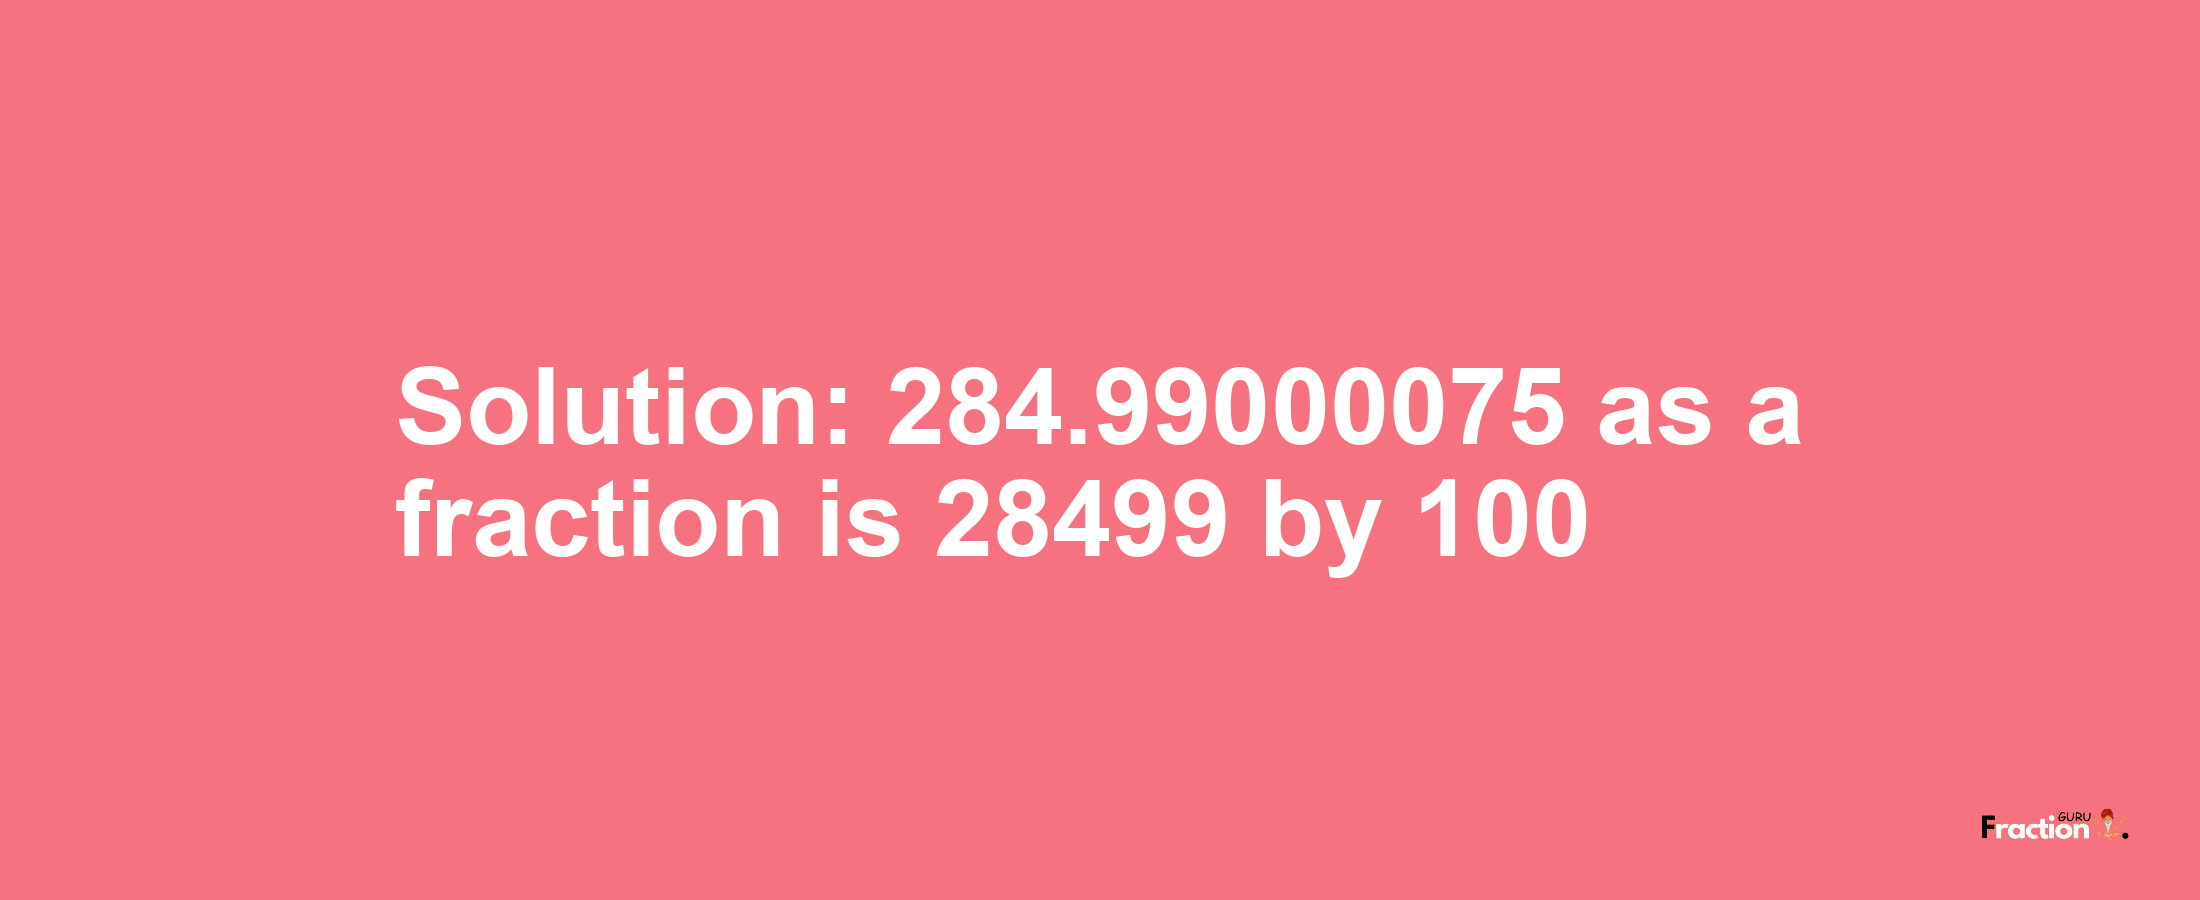 Solution:284.99000075 as a fraction is 28499/100